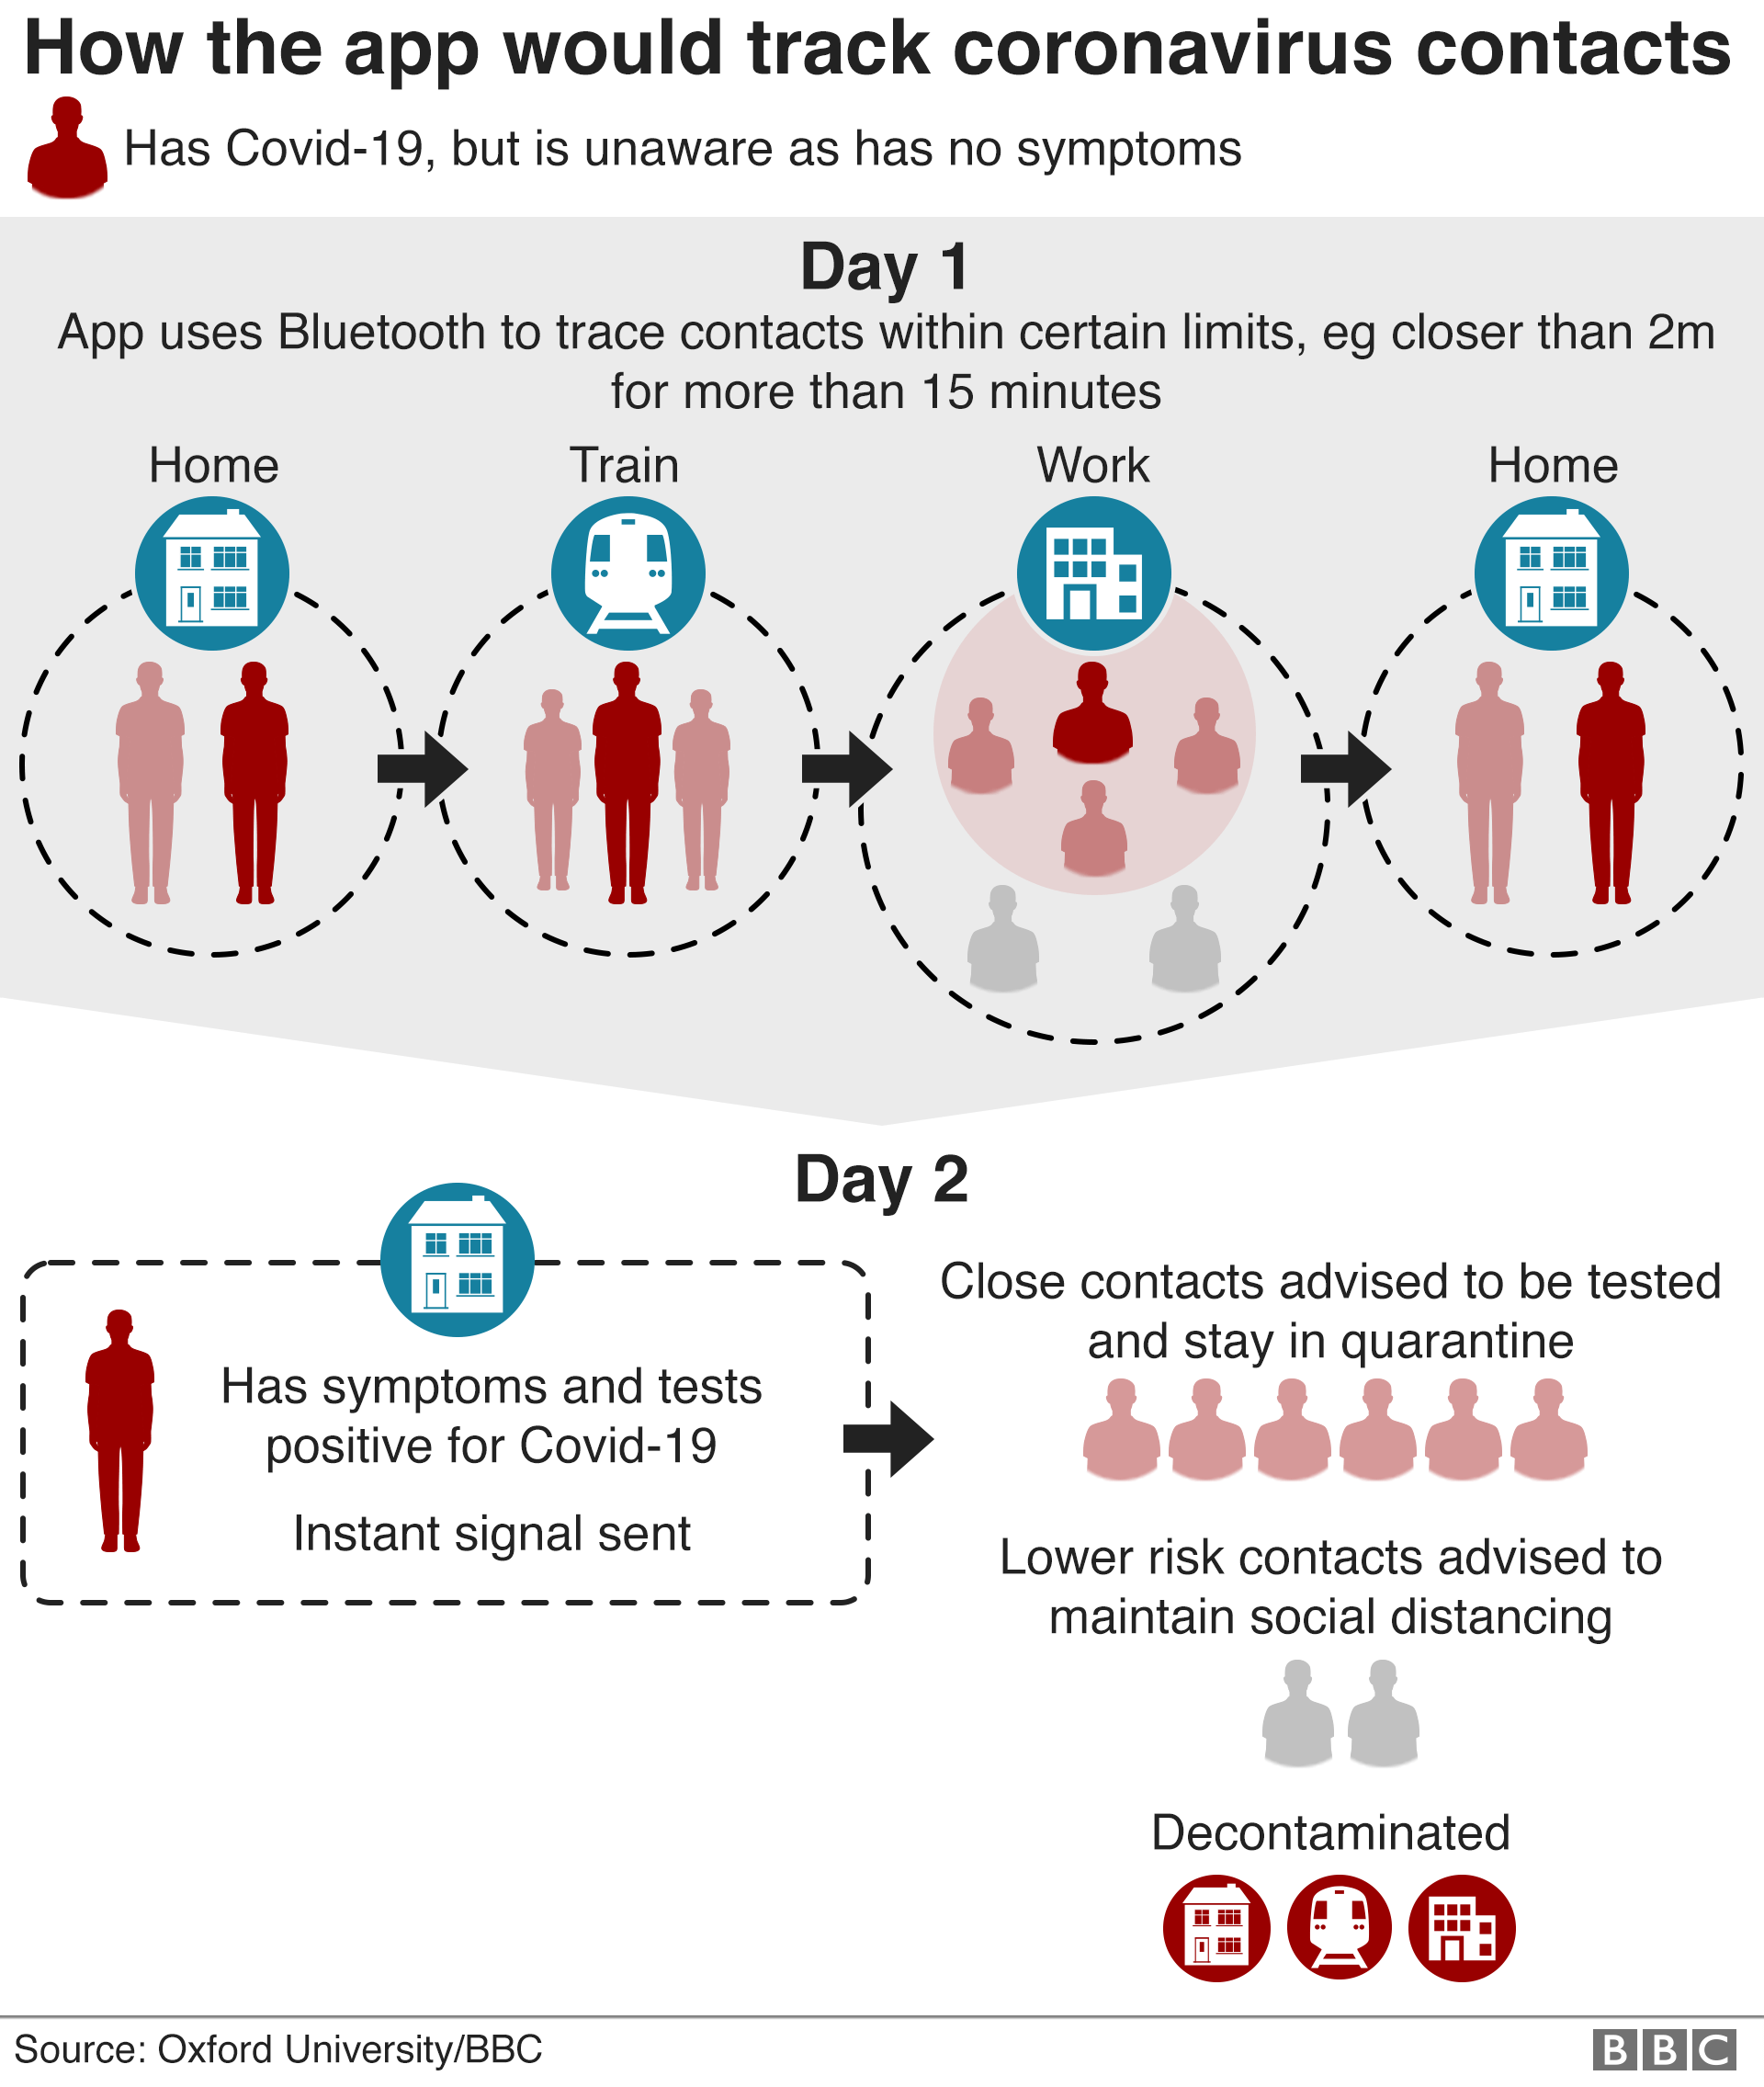 Infographic shows how app would trace contacts using location and QR barcode scans and send them a notification when they'd been close to someone diagnosed with Covid-19